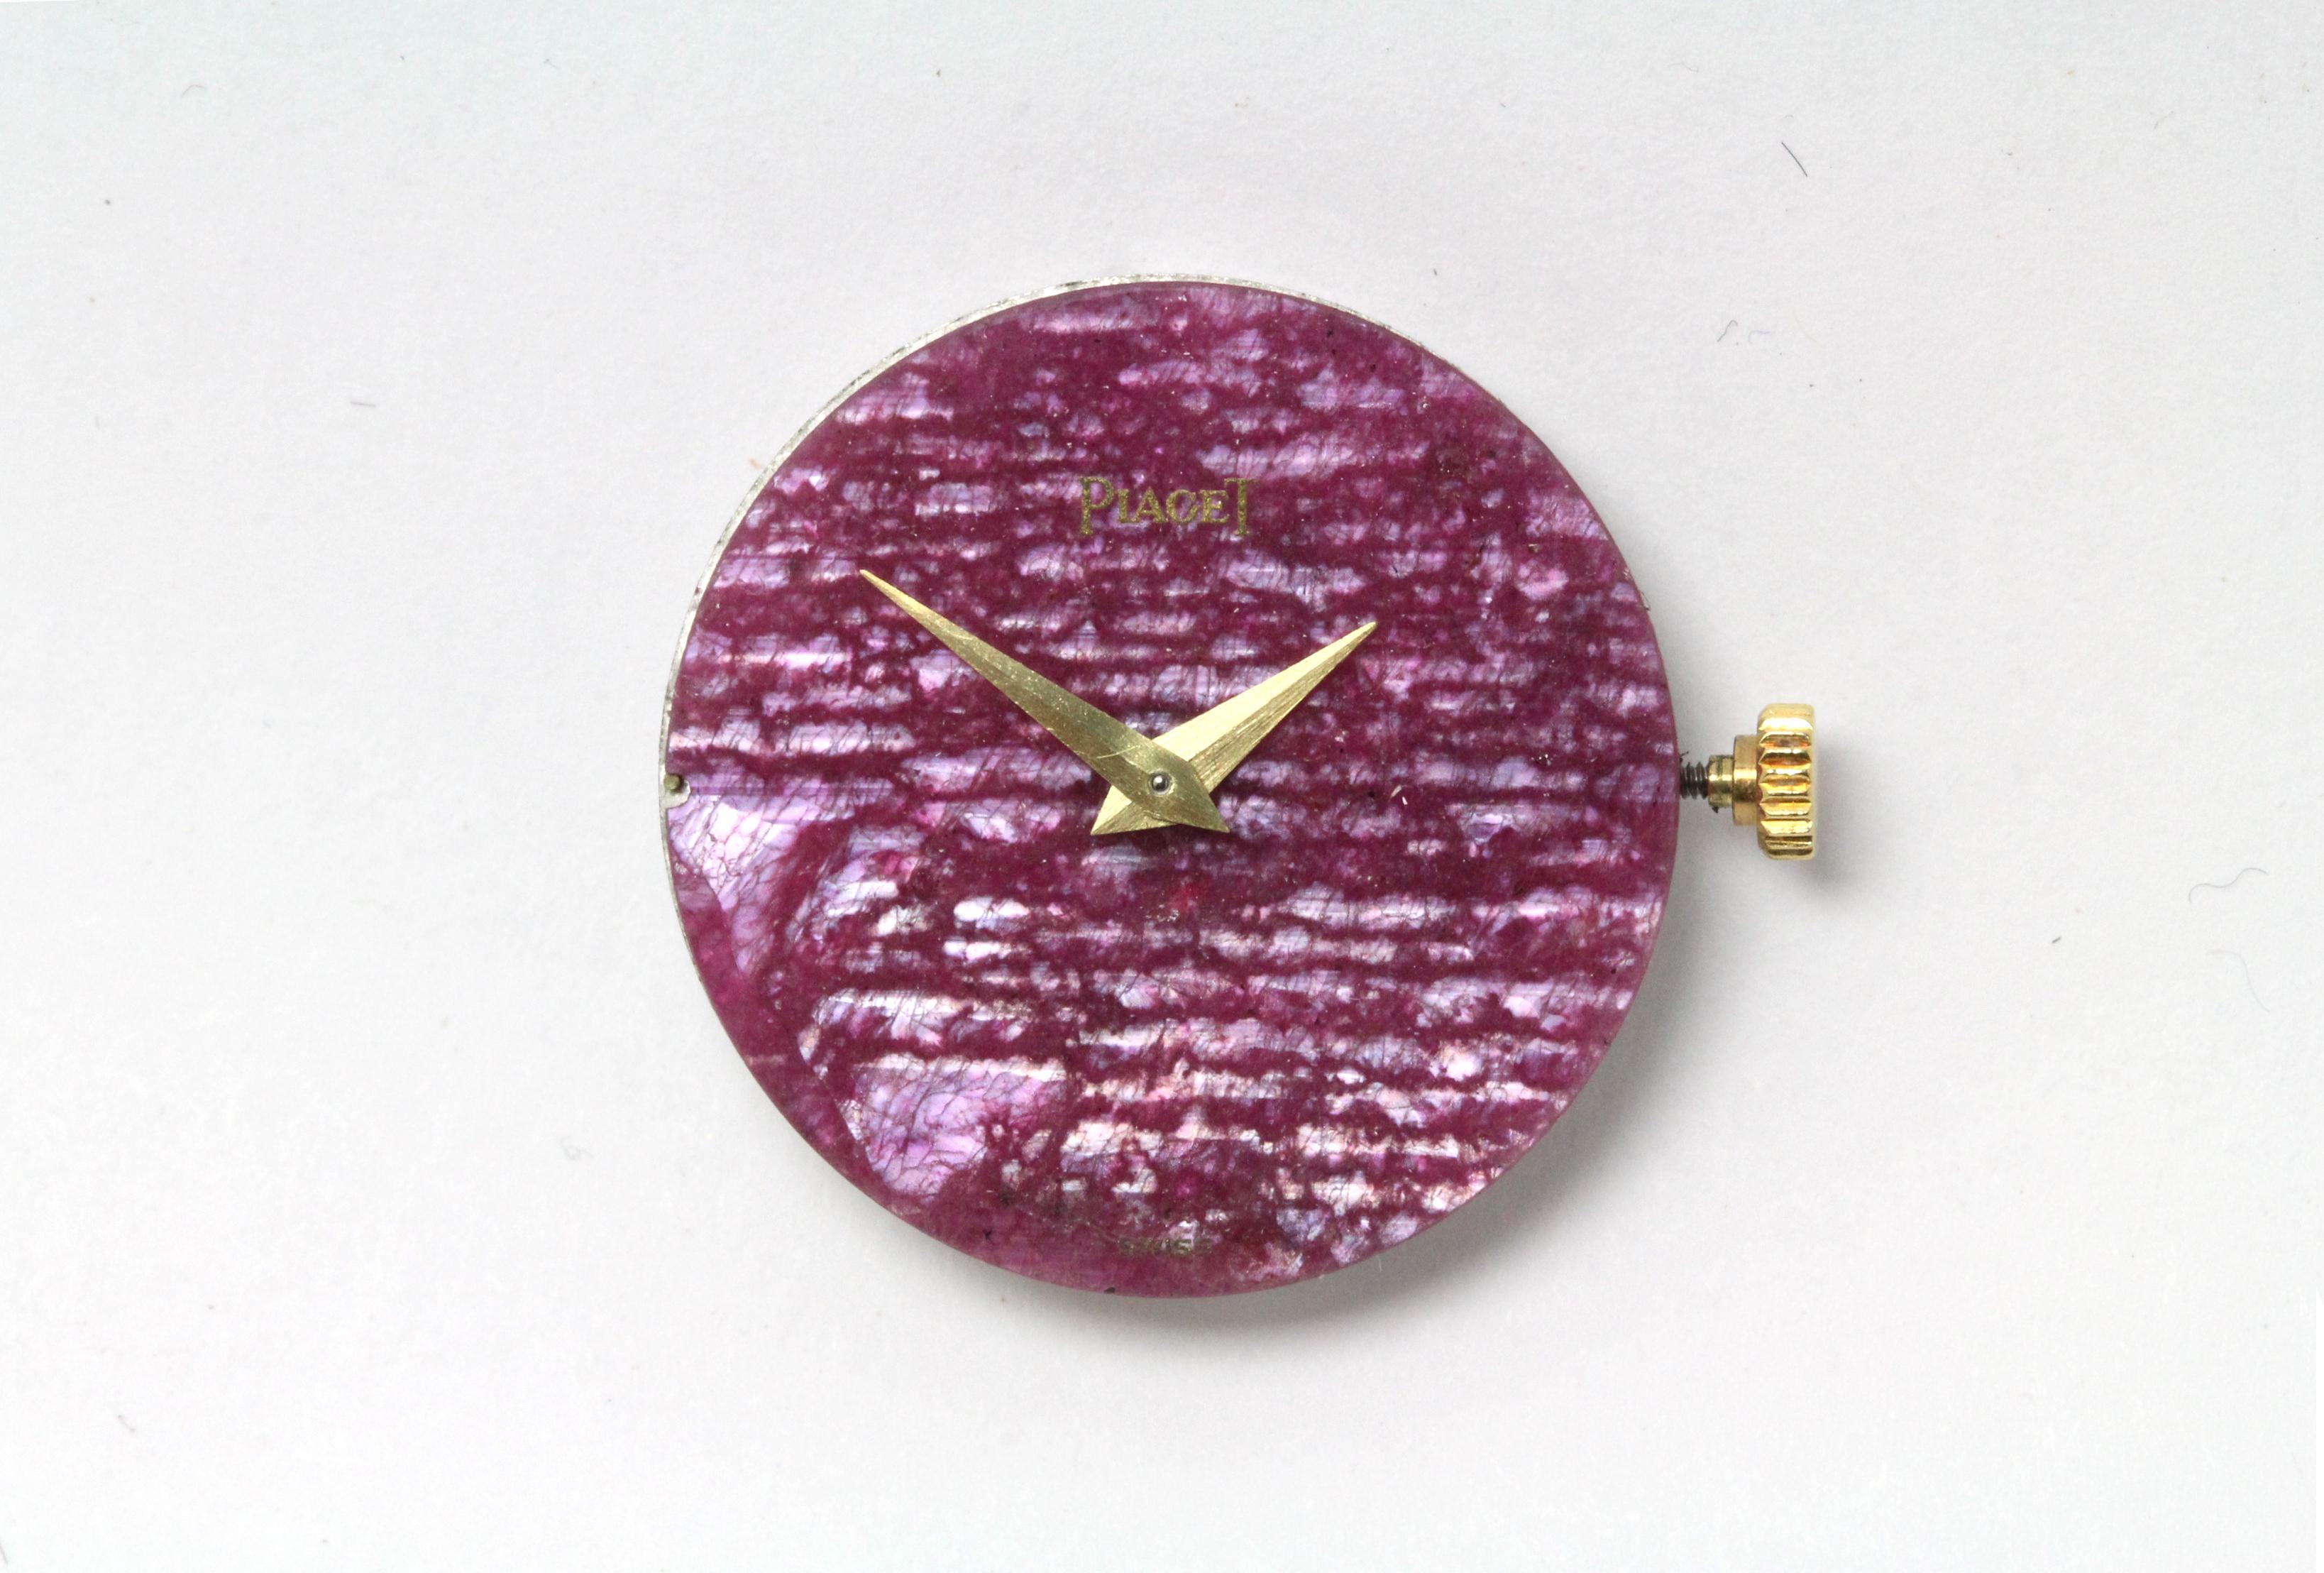 Rare Piaget Ruby Dial Diamond 18 Karat Gold Mechanical Wristwatch In Good Condition For Sale In New York, NY